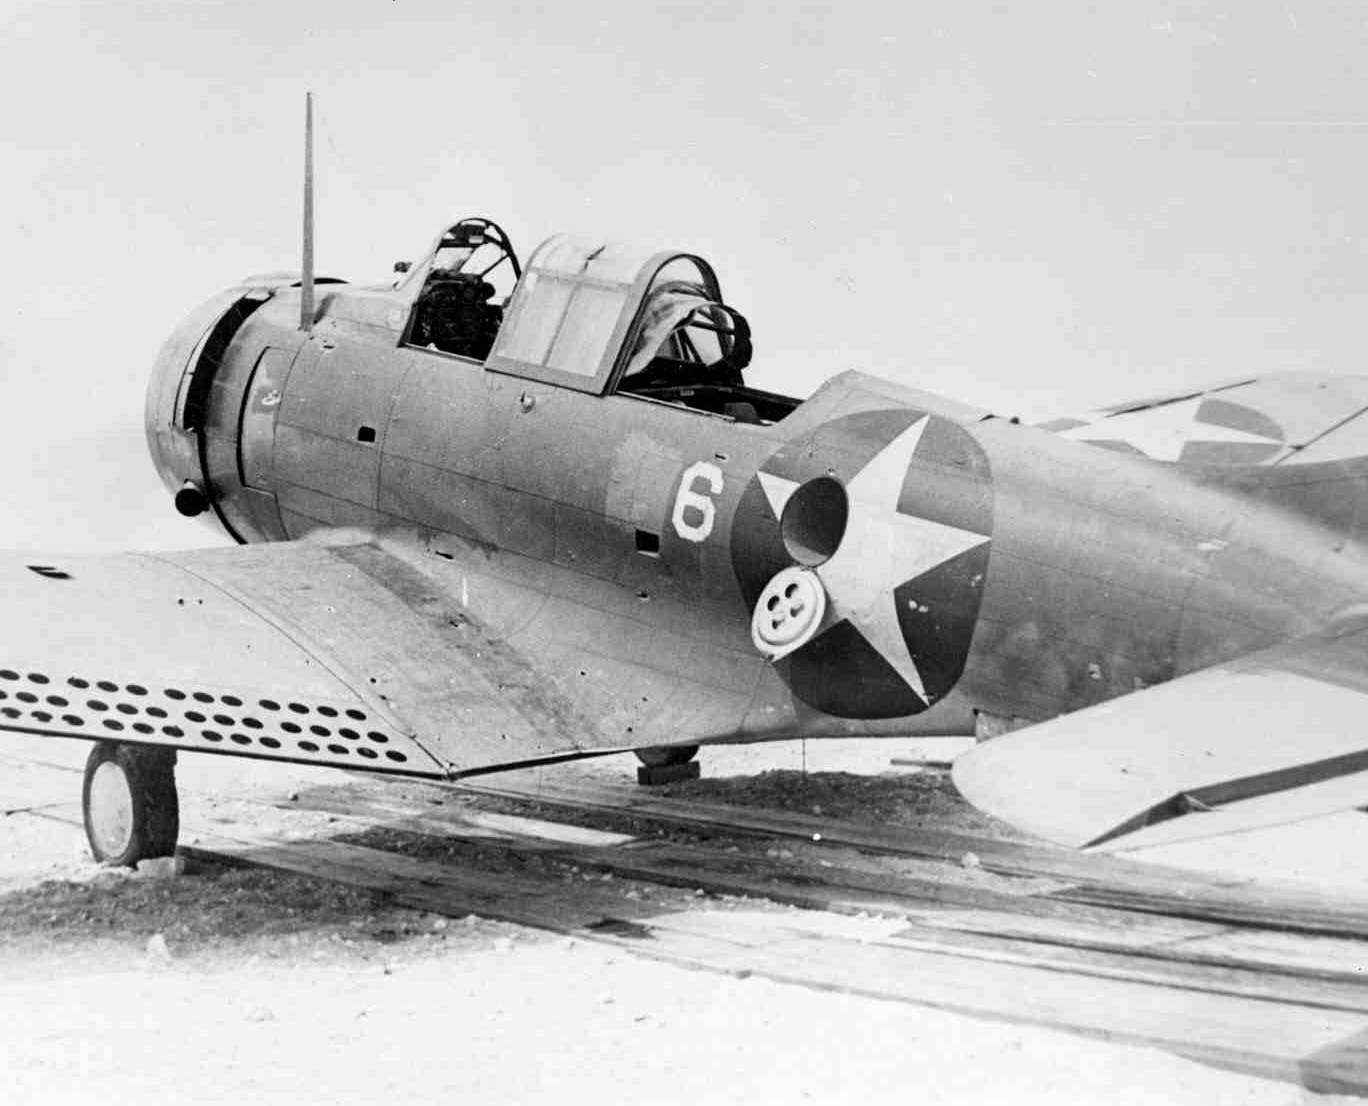 SBD-2 Dauntless aircraft of US Marine Corps squadron VMSB-241 at Midway Atoll, 4 Jun 1942, photo 2 of 2; note damage sustained during attack on Hiryu